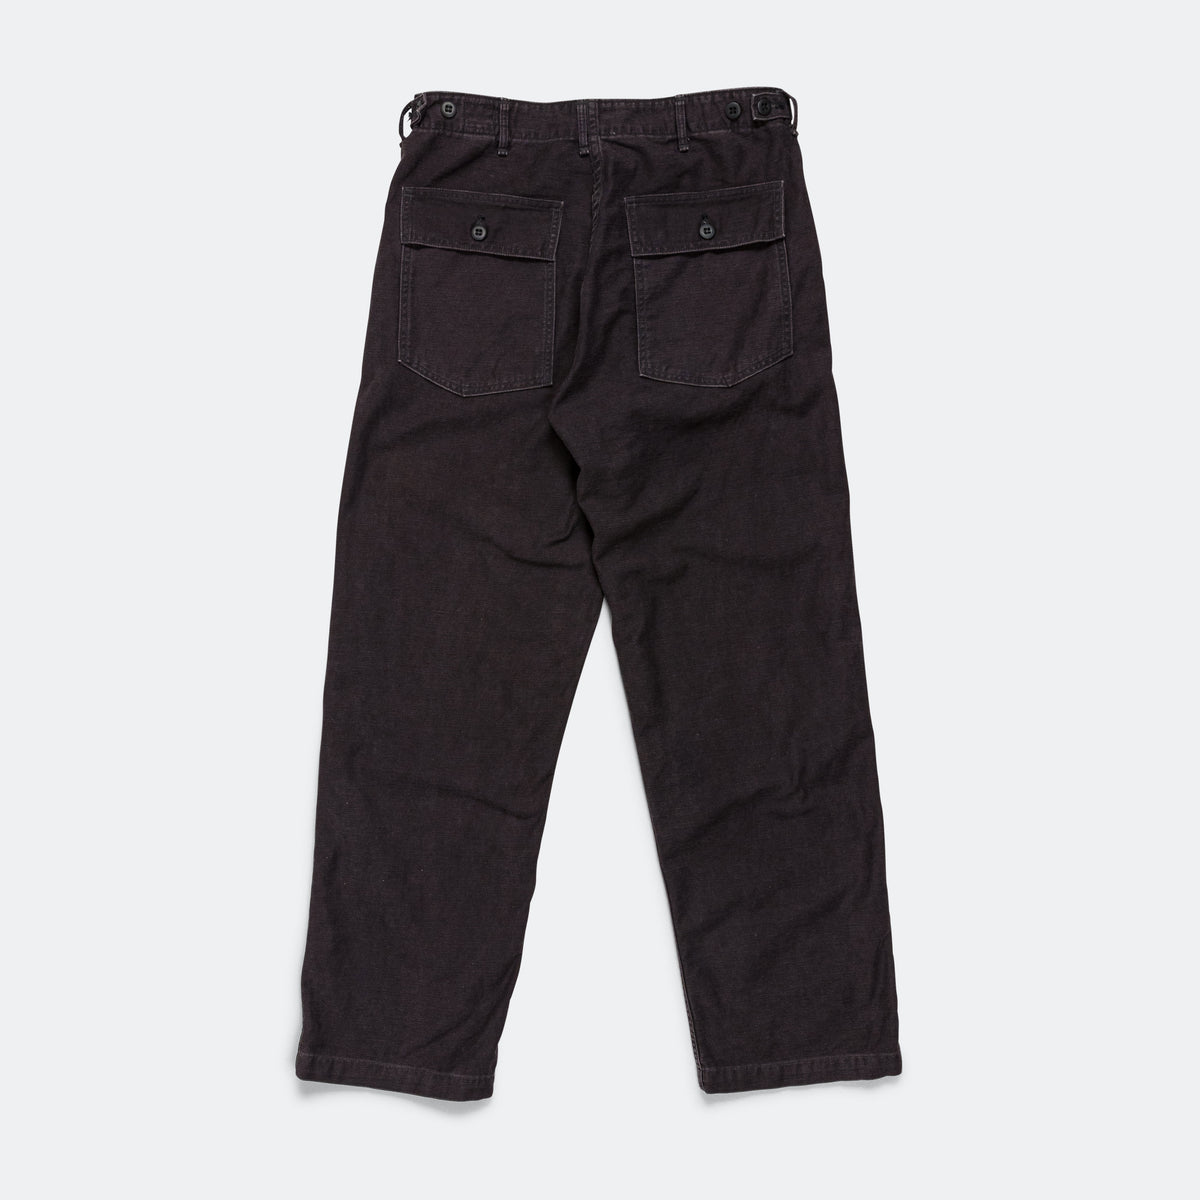 orSlow US Army Fatigue Pants (Regular Fit) - Black | UP THERE